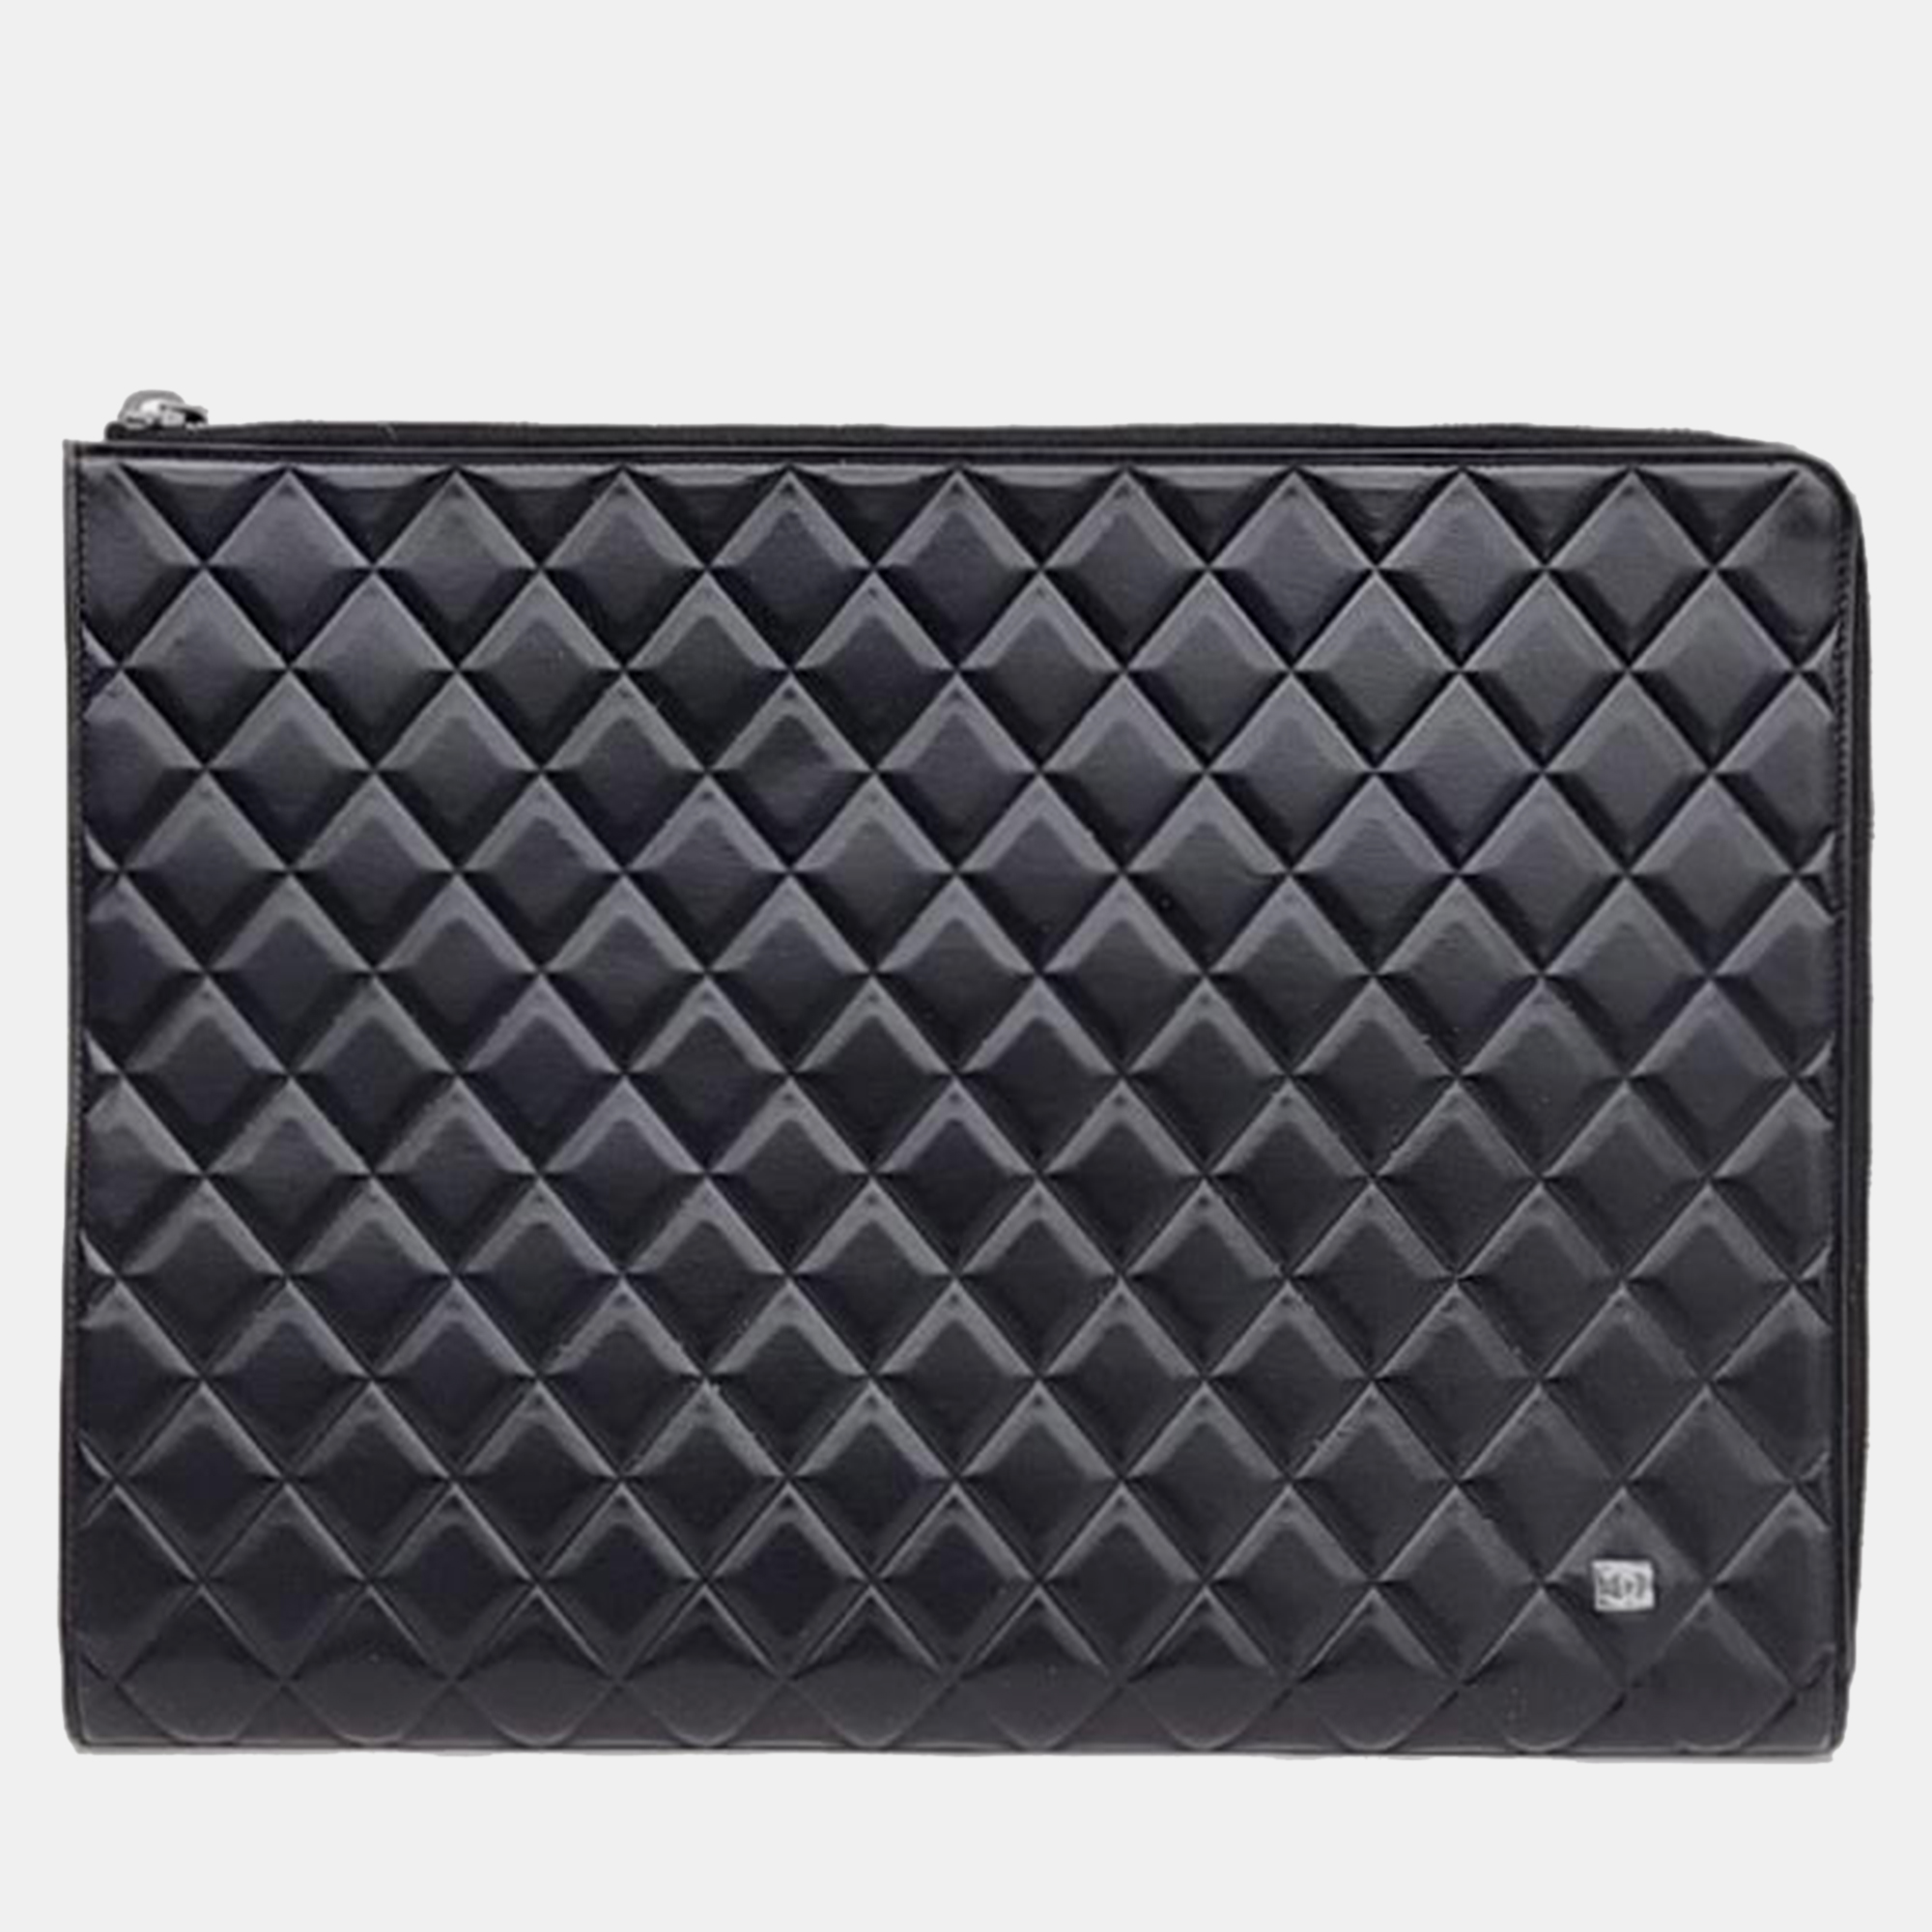 Chanel black leather clutch